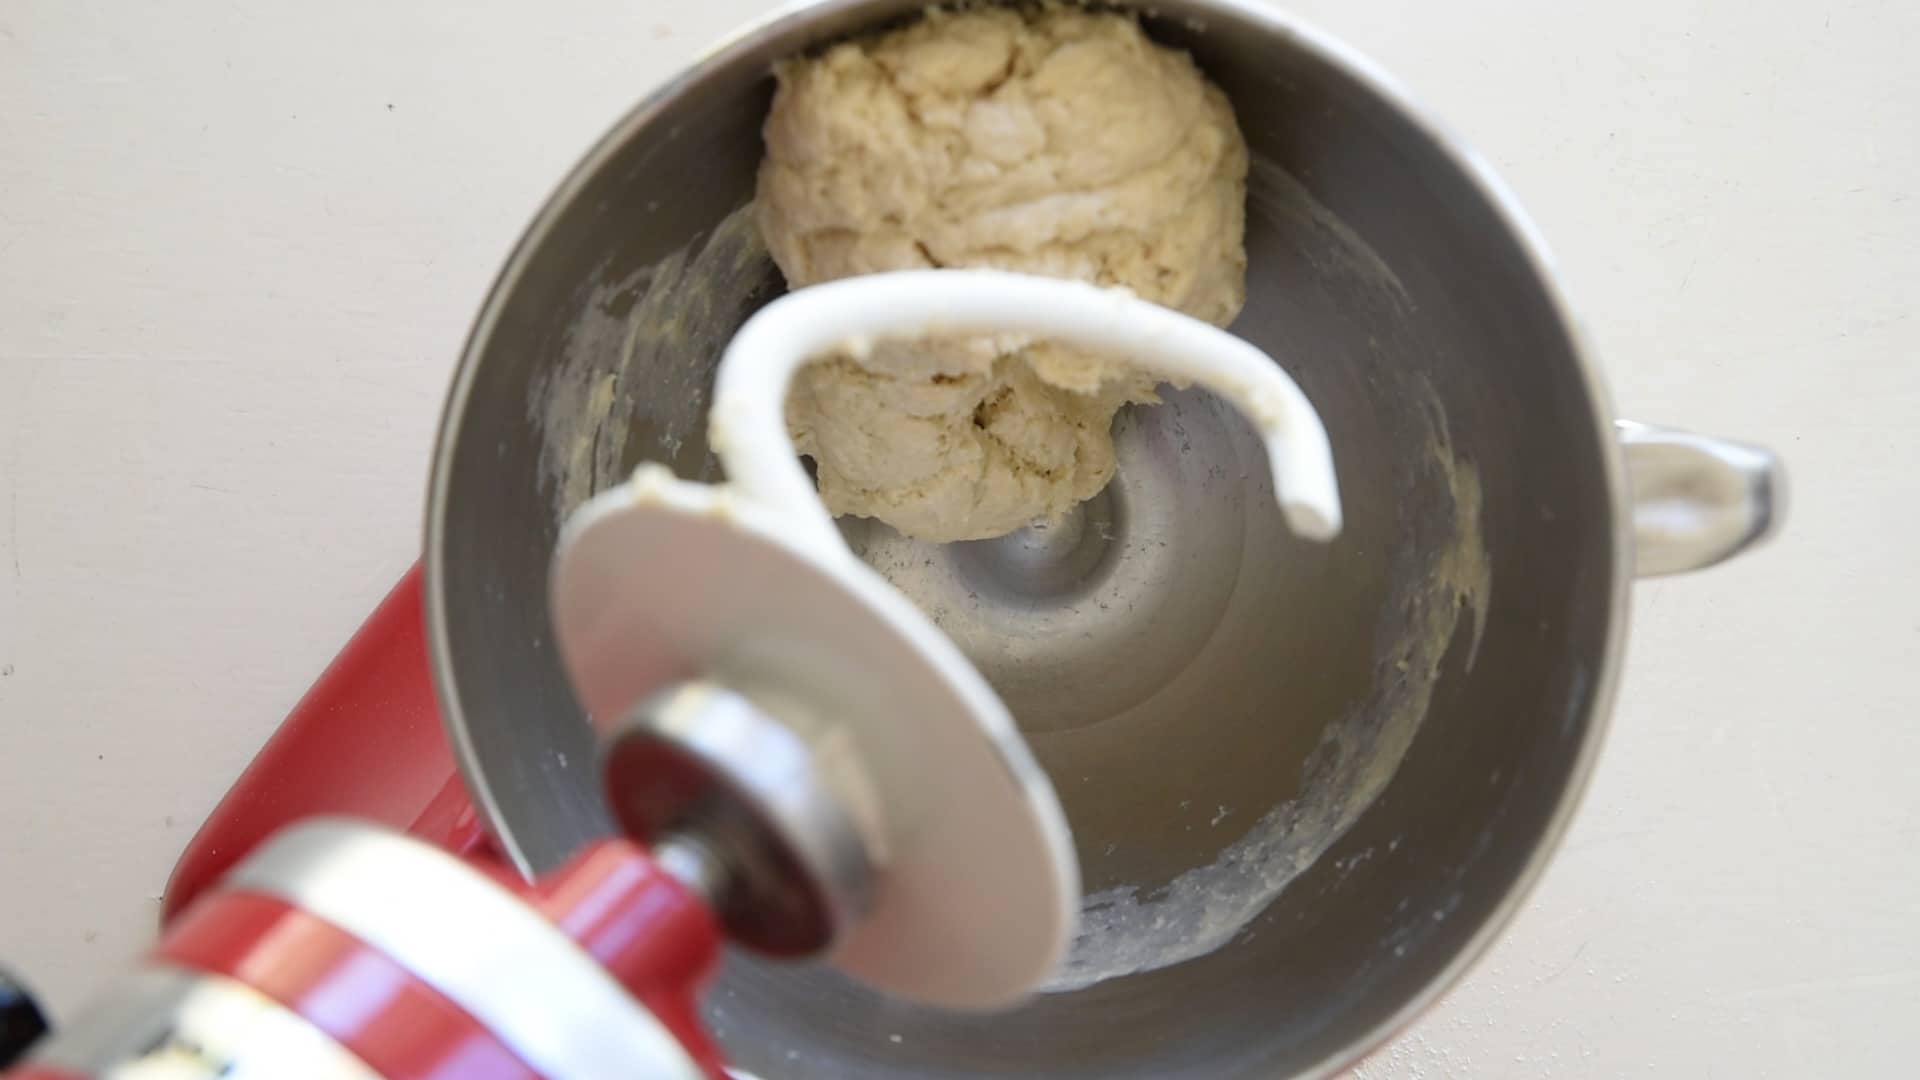 Knead until the dough is smooth and elastic